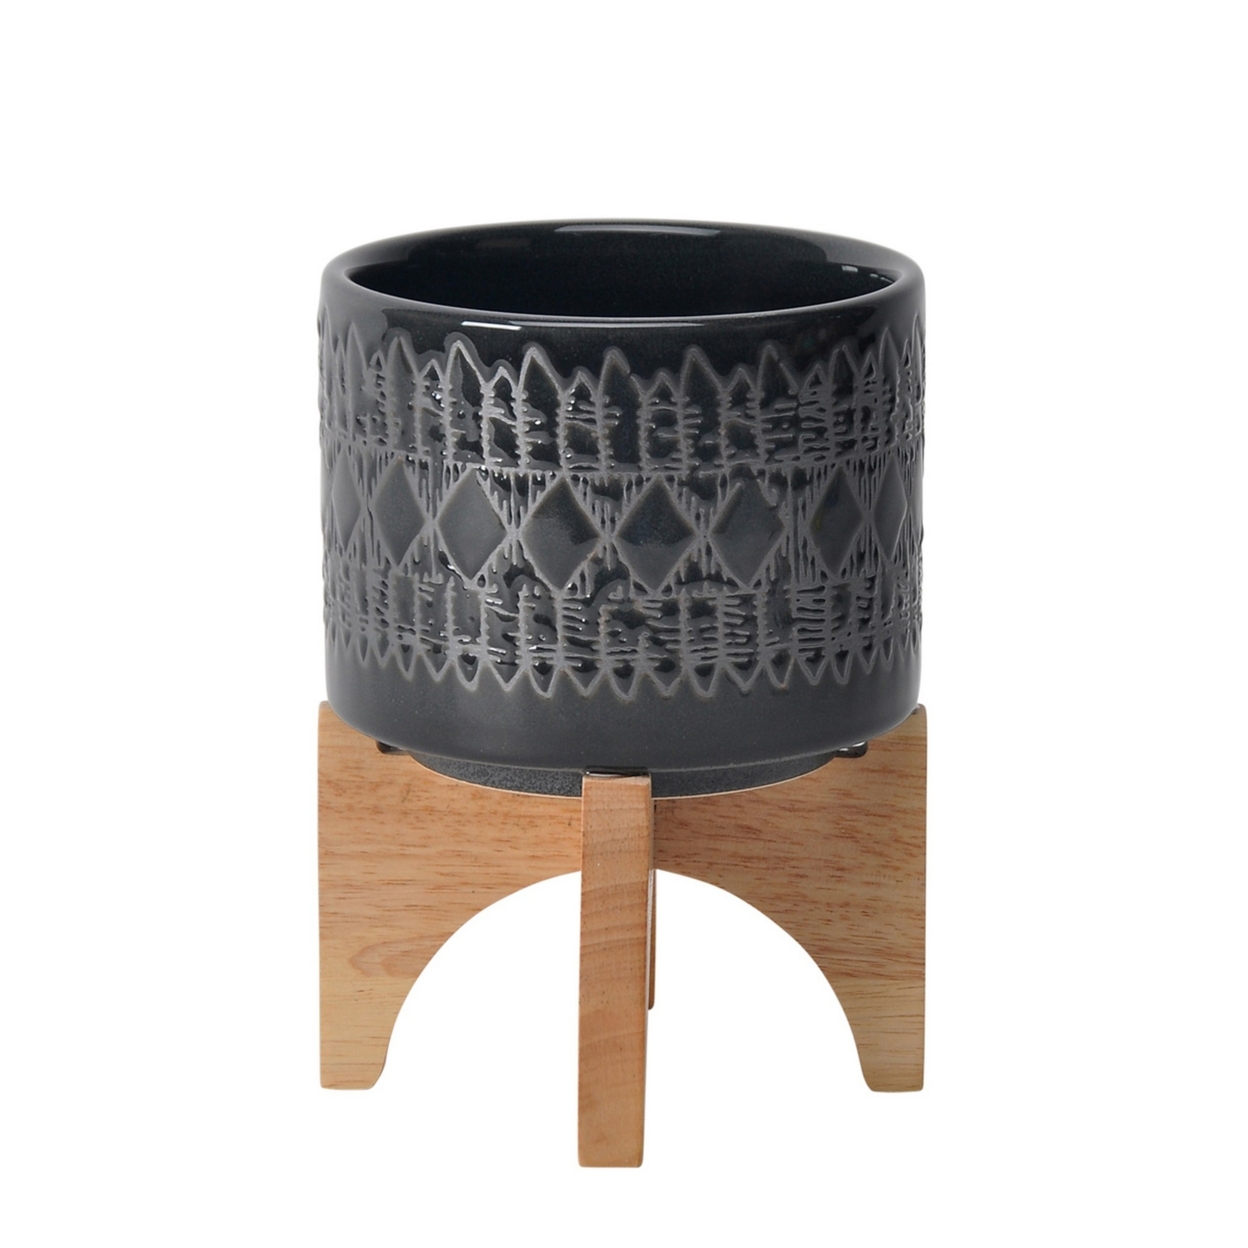 Planter With Wooden Stand And Native Design, Small, Black- Saltoro Sherpi